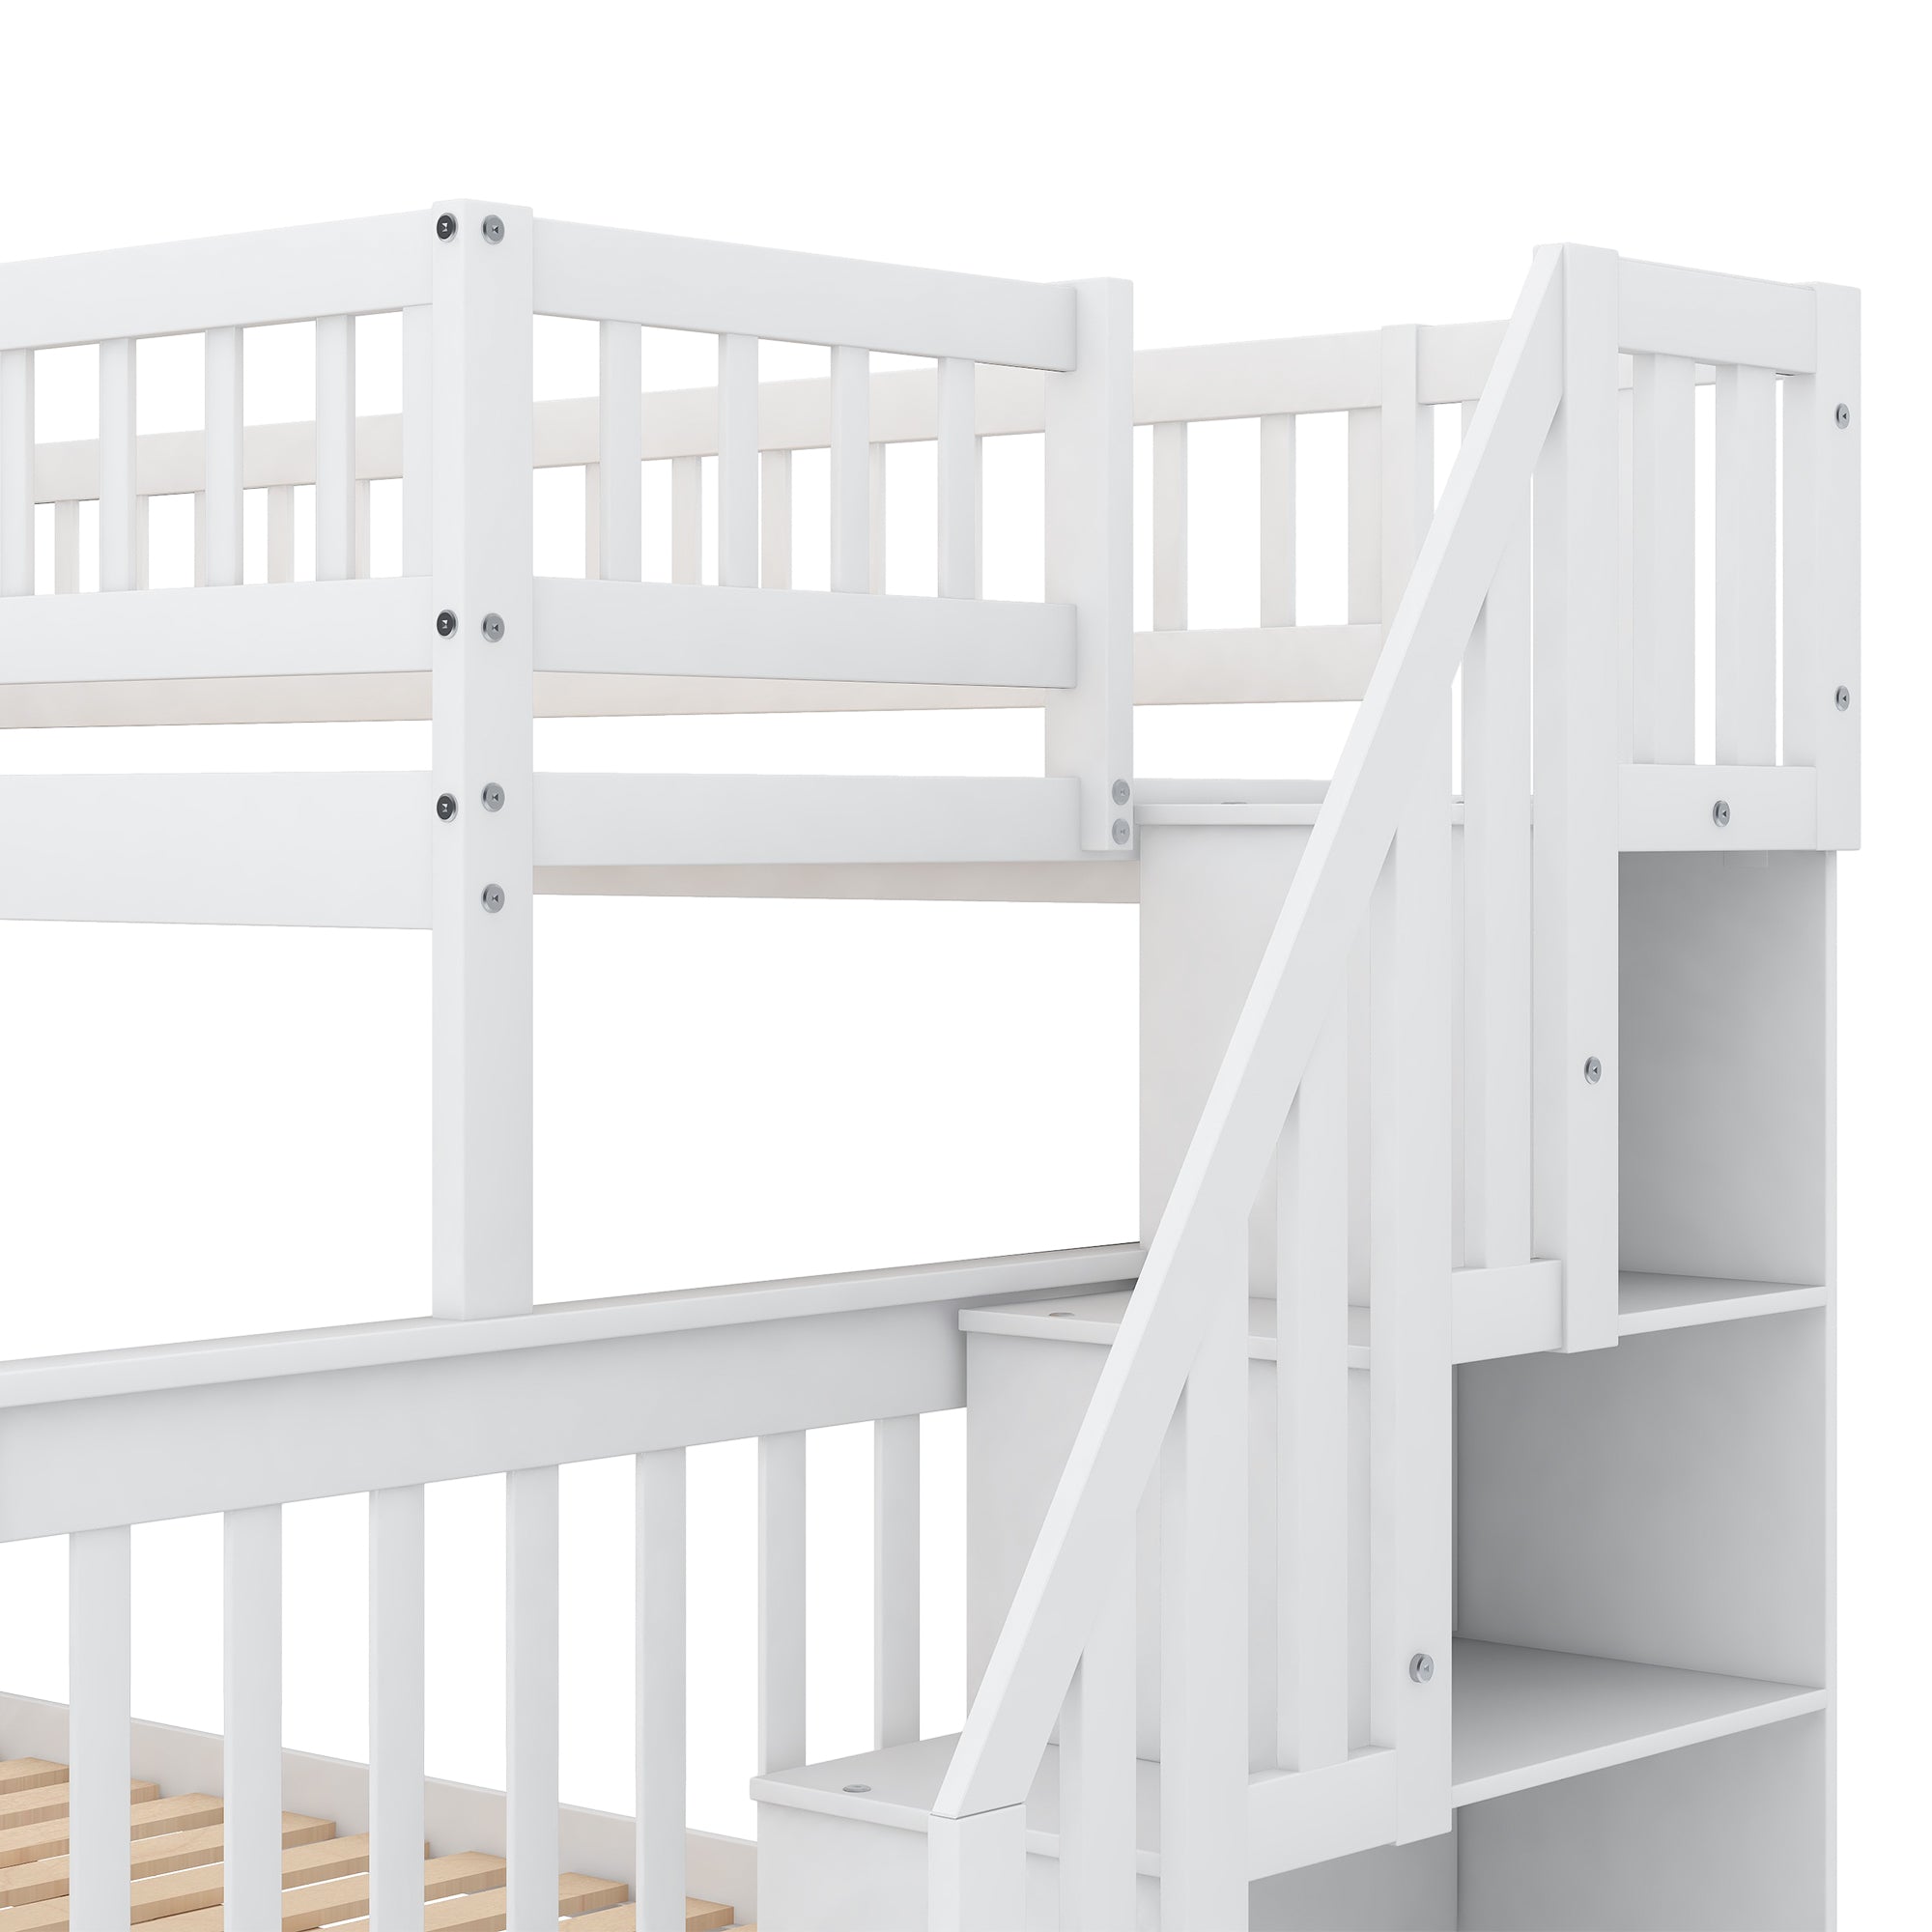 Bellemave® Twin over Full Bunk Bed with Storage Stairs Bellemave®